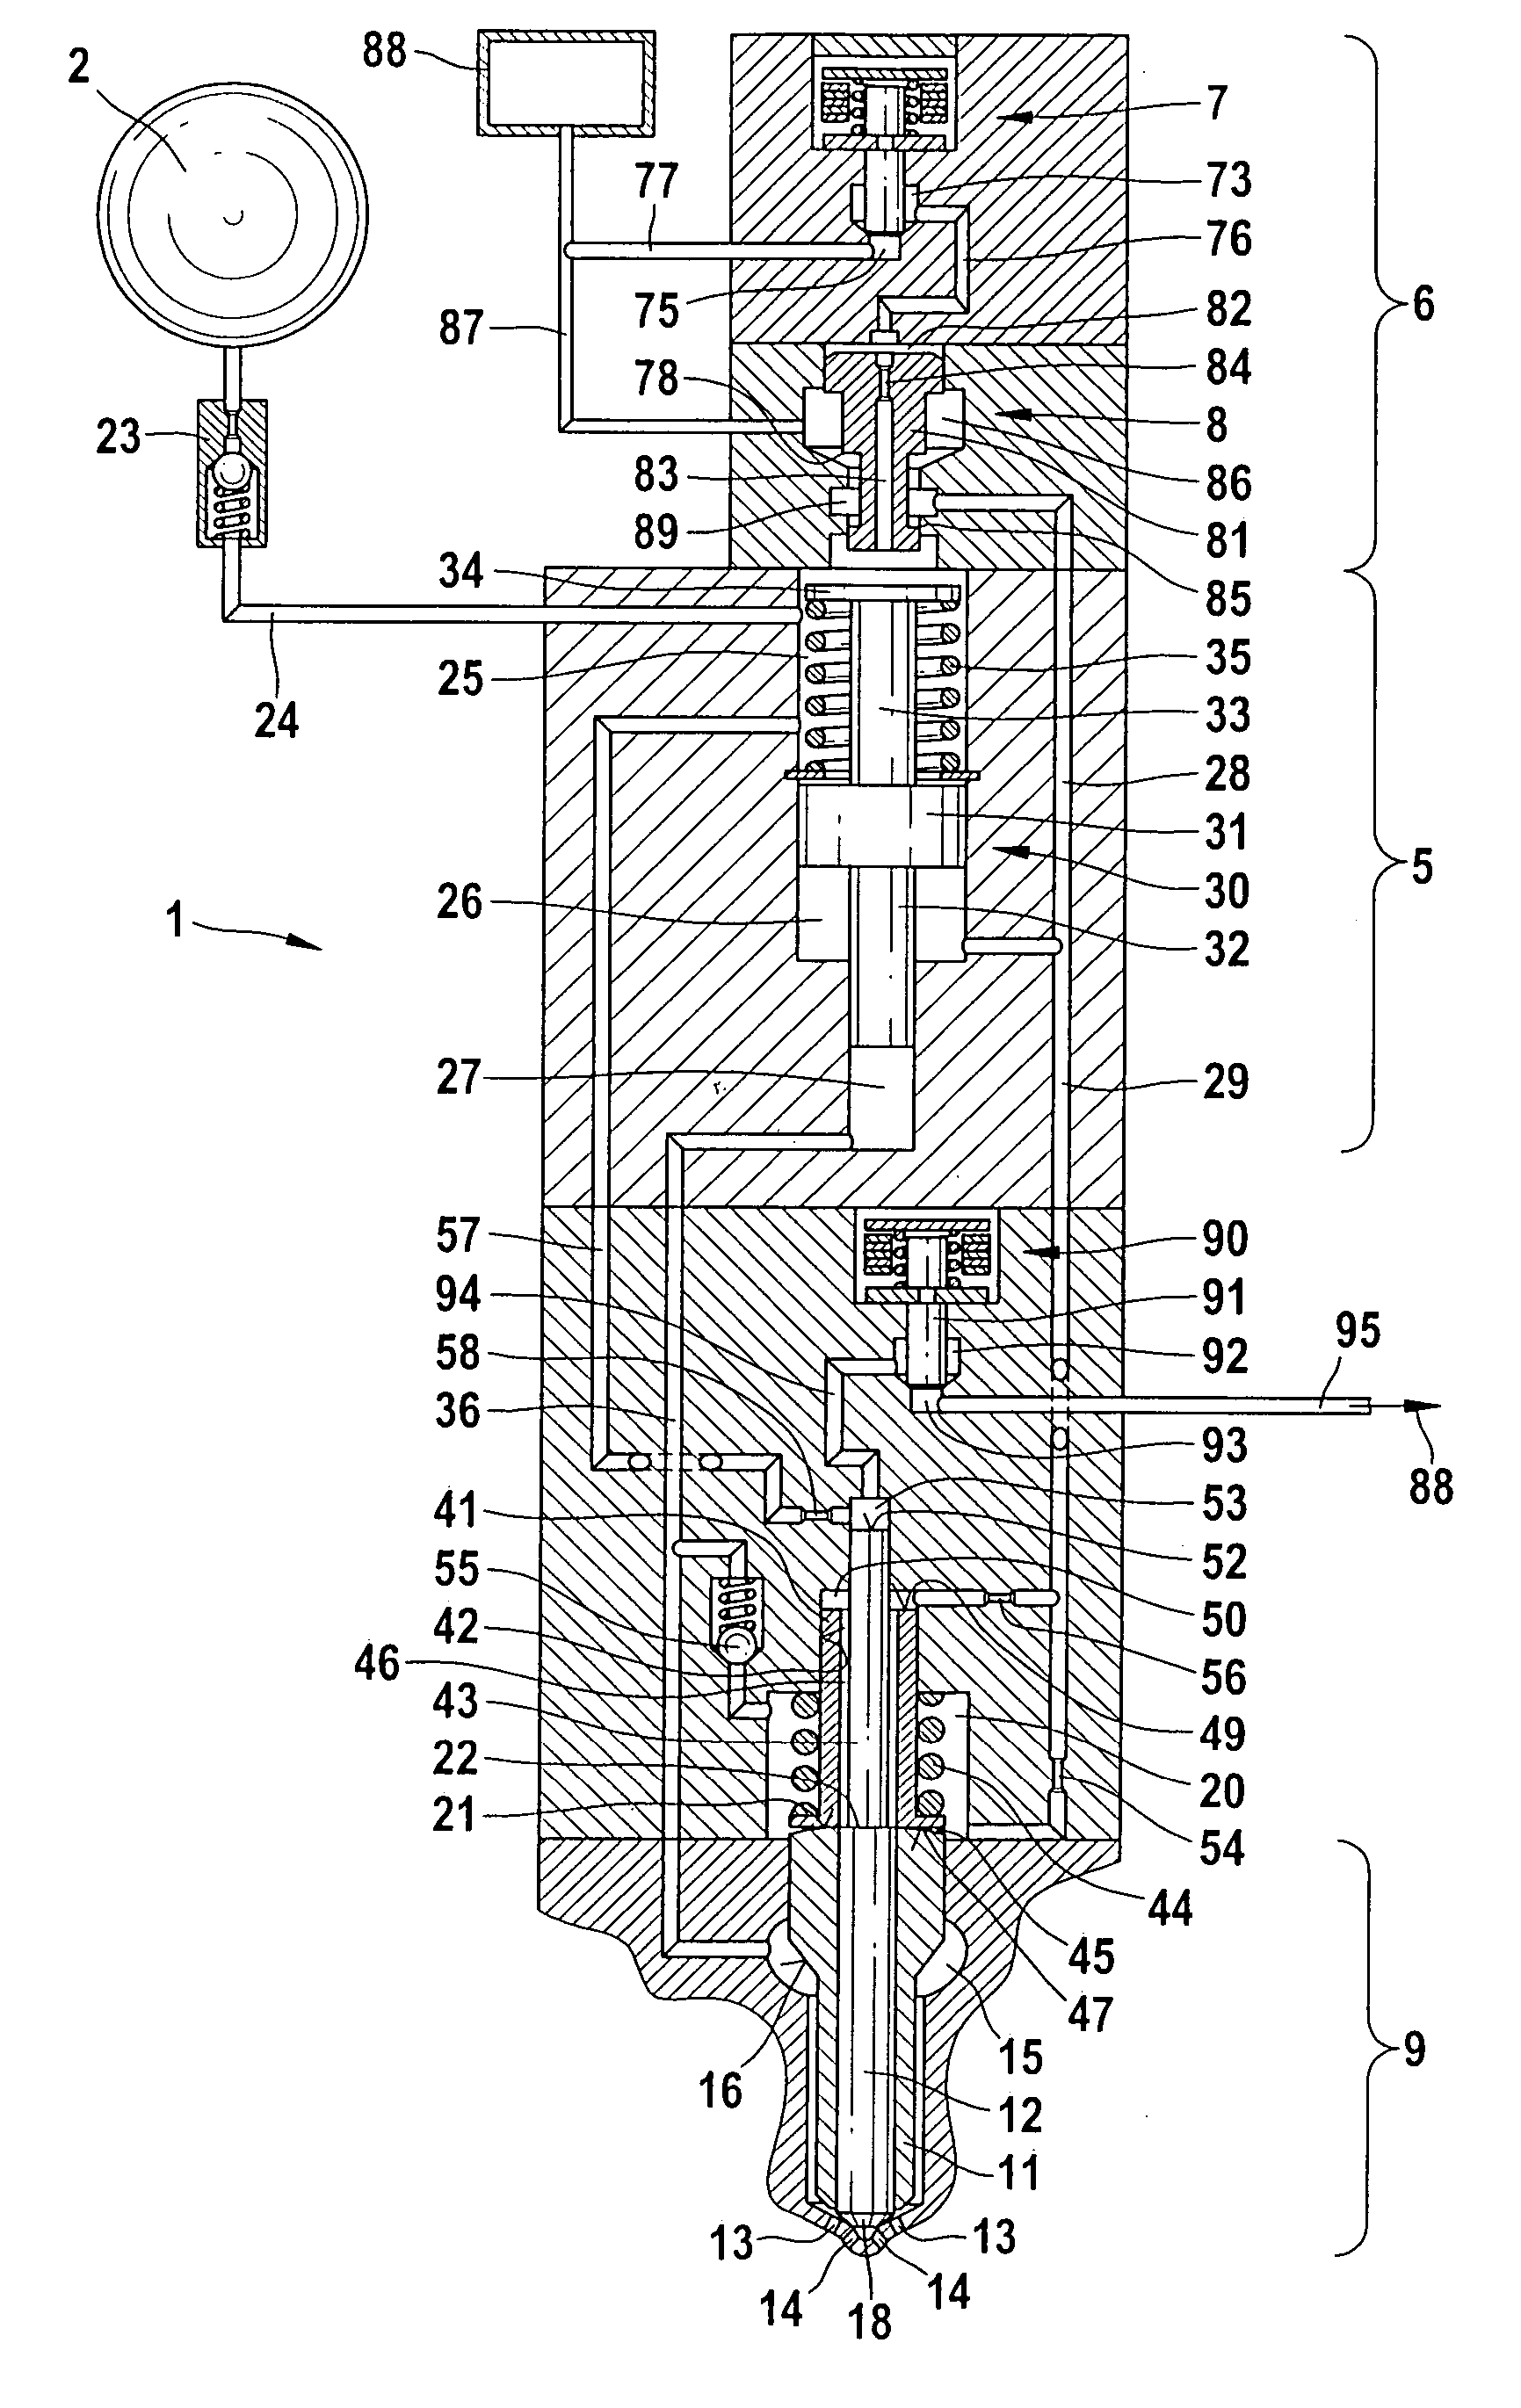 Fuel injection apparatus for internal combustion engines, with nozzle needles that can be actuated directly